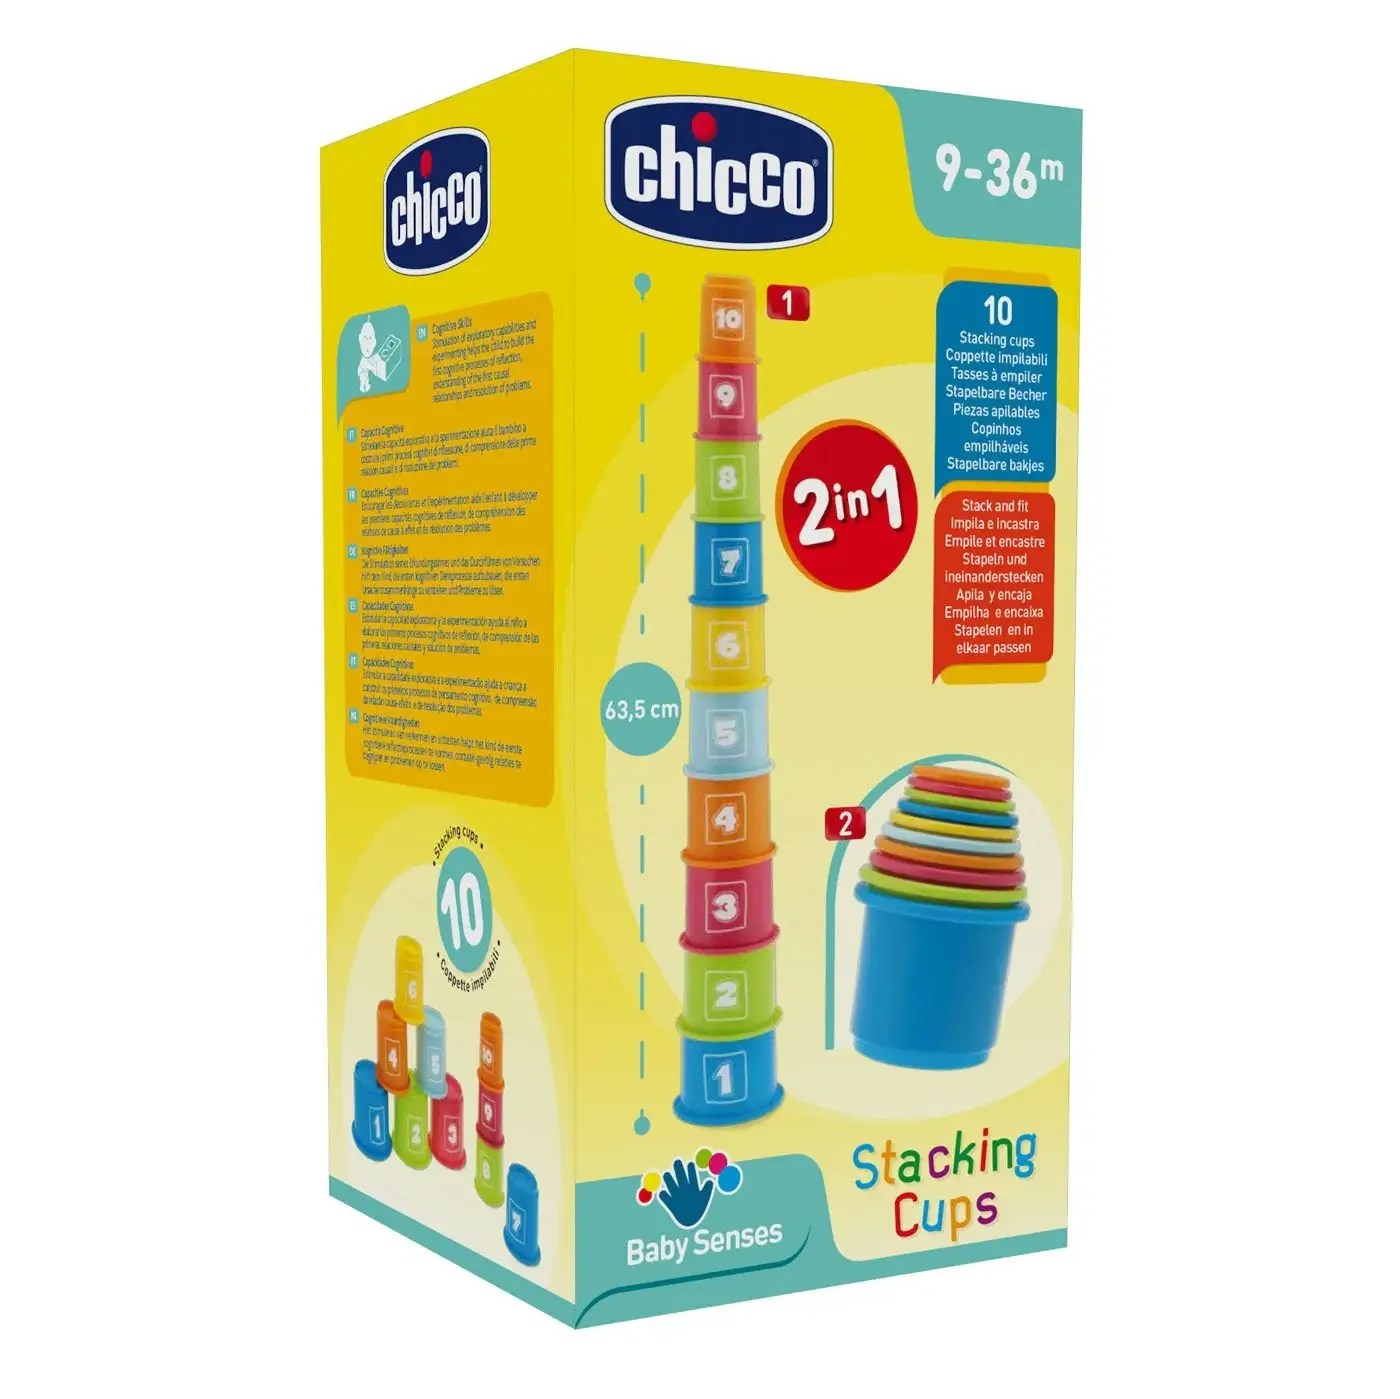 CHICCO Παζλ Πυραμίδας Με Κυπελλάκια (9-36 μηνών)